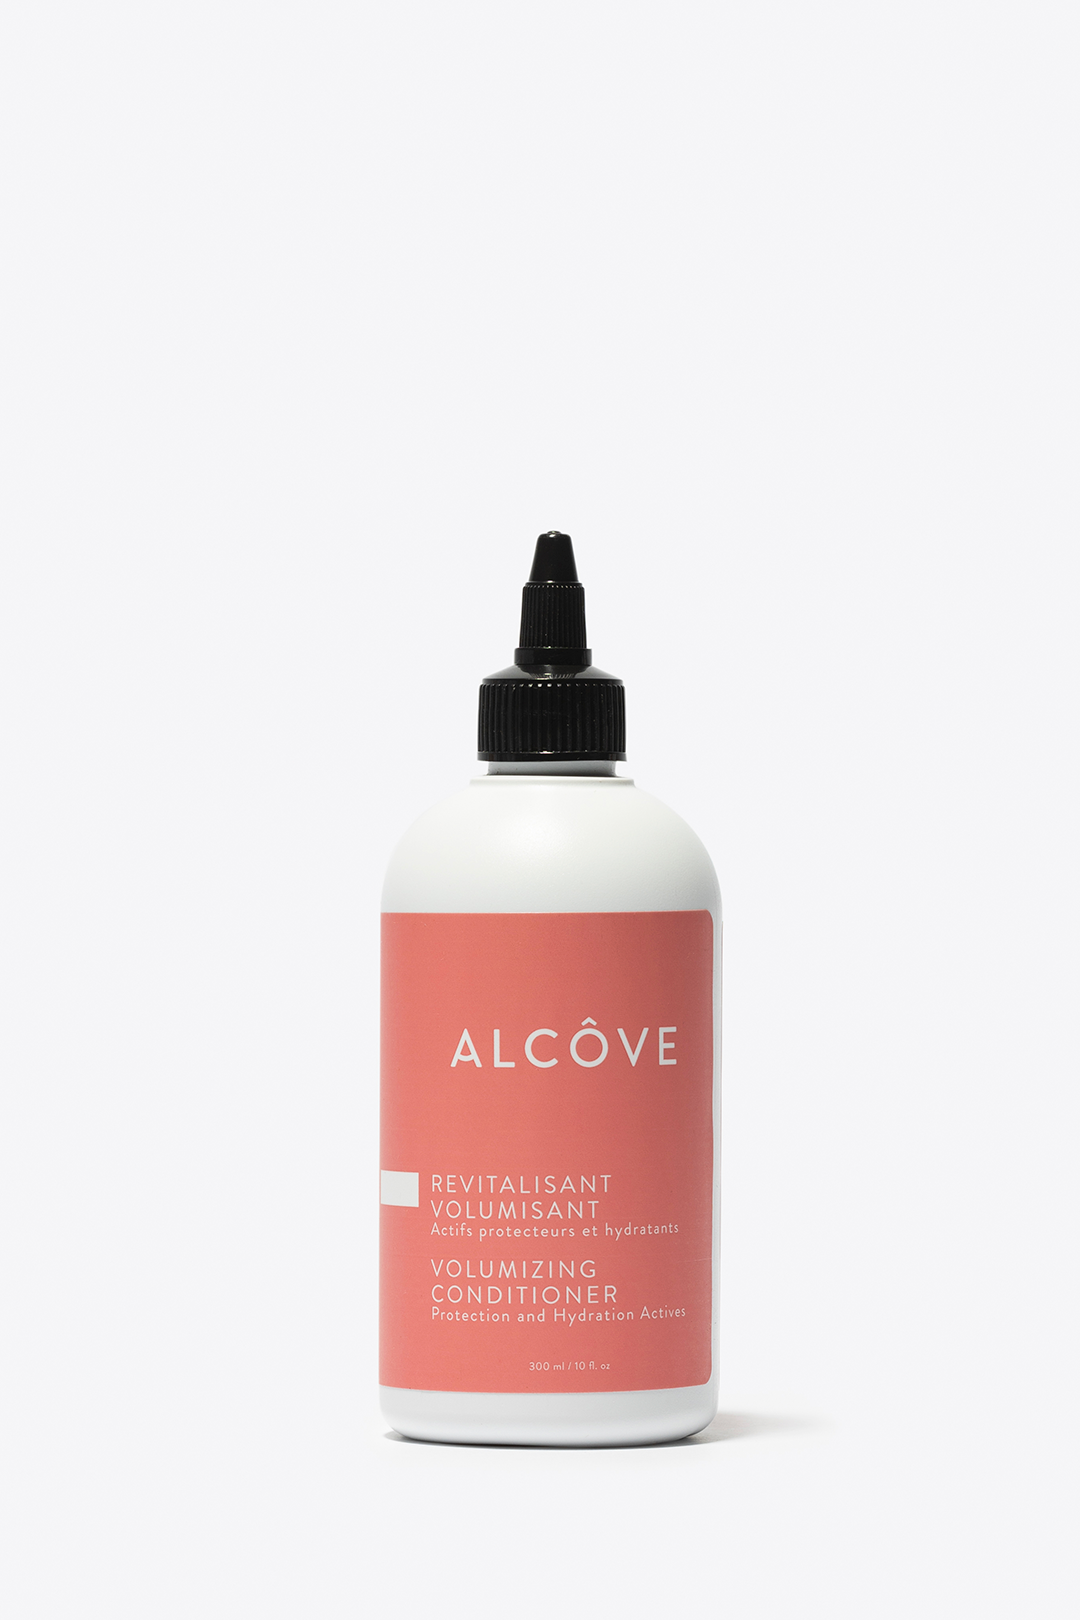 Alcove - VOLUMIZING CONDITIONER - 300ml - ProCare Outlet by Alcove